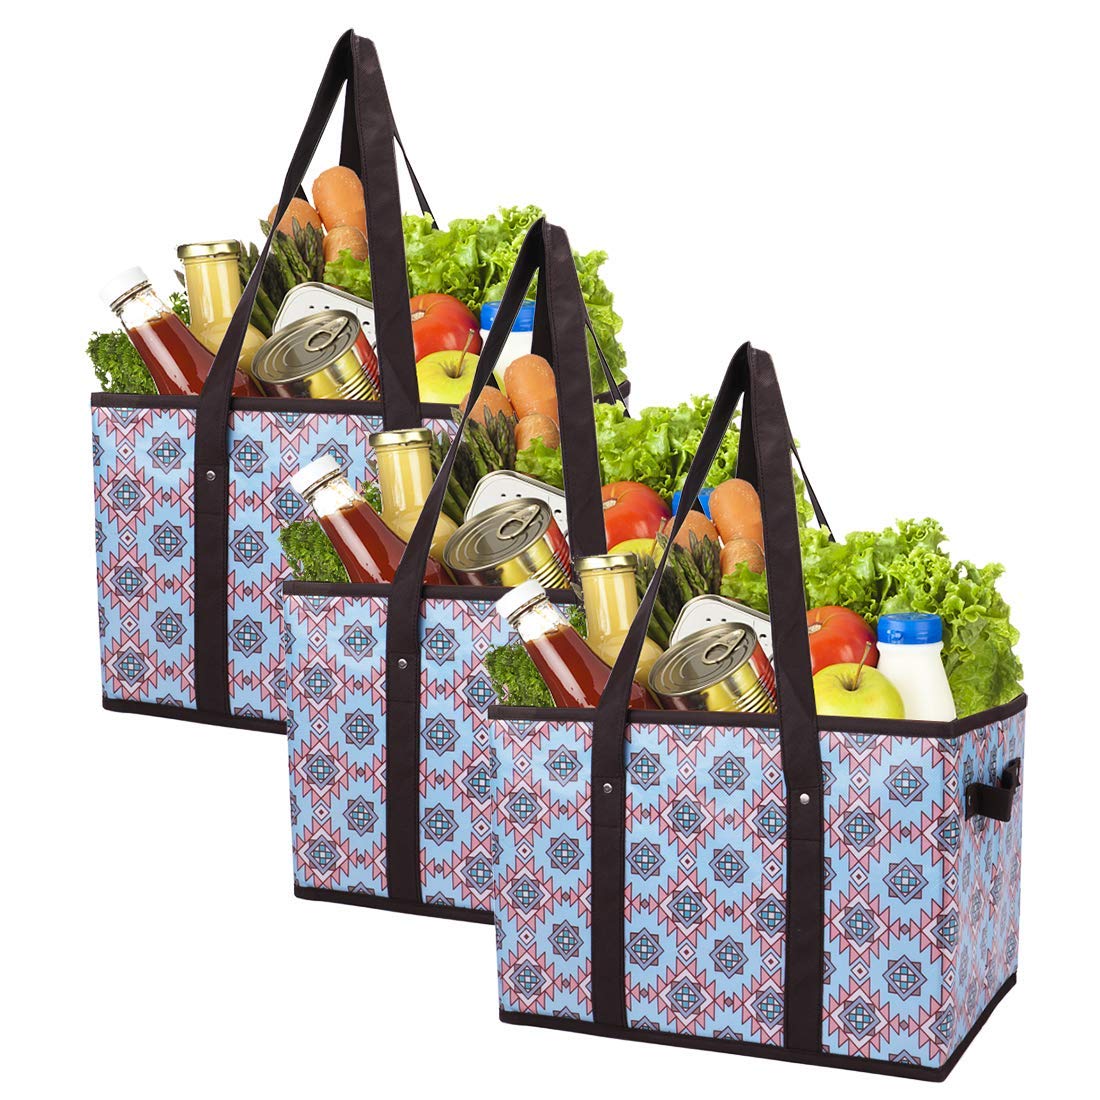 Foraineam Reusable Grocery Bags Set Durable Heavy Duty Tote Bag Collapsible Grocery Shopping Box Bag with Reinforced Bottom, Pack of 3